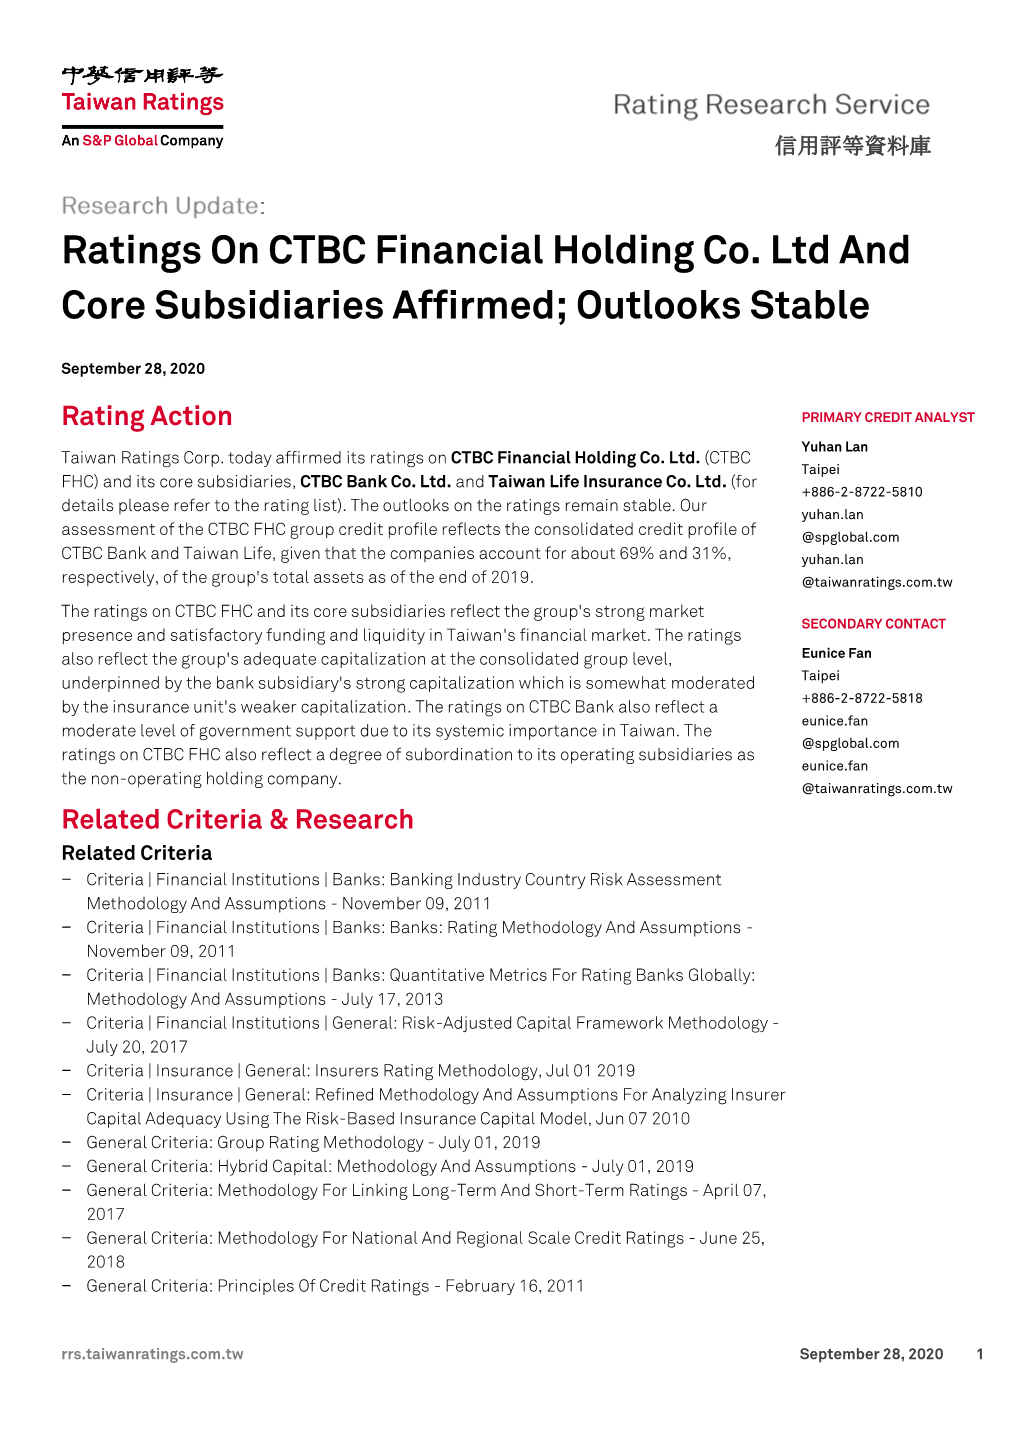 Ratings on CTBC Financial Holding Co. Ltd and Core Subsidiaries Affirmed; Outlooks Stable